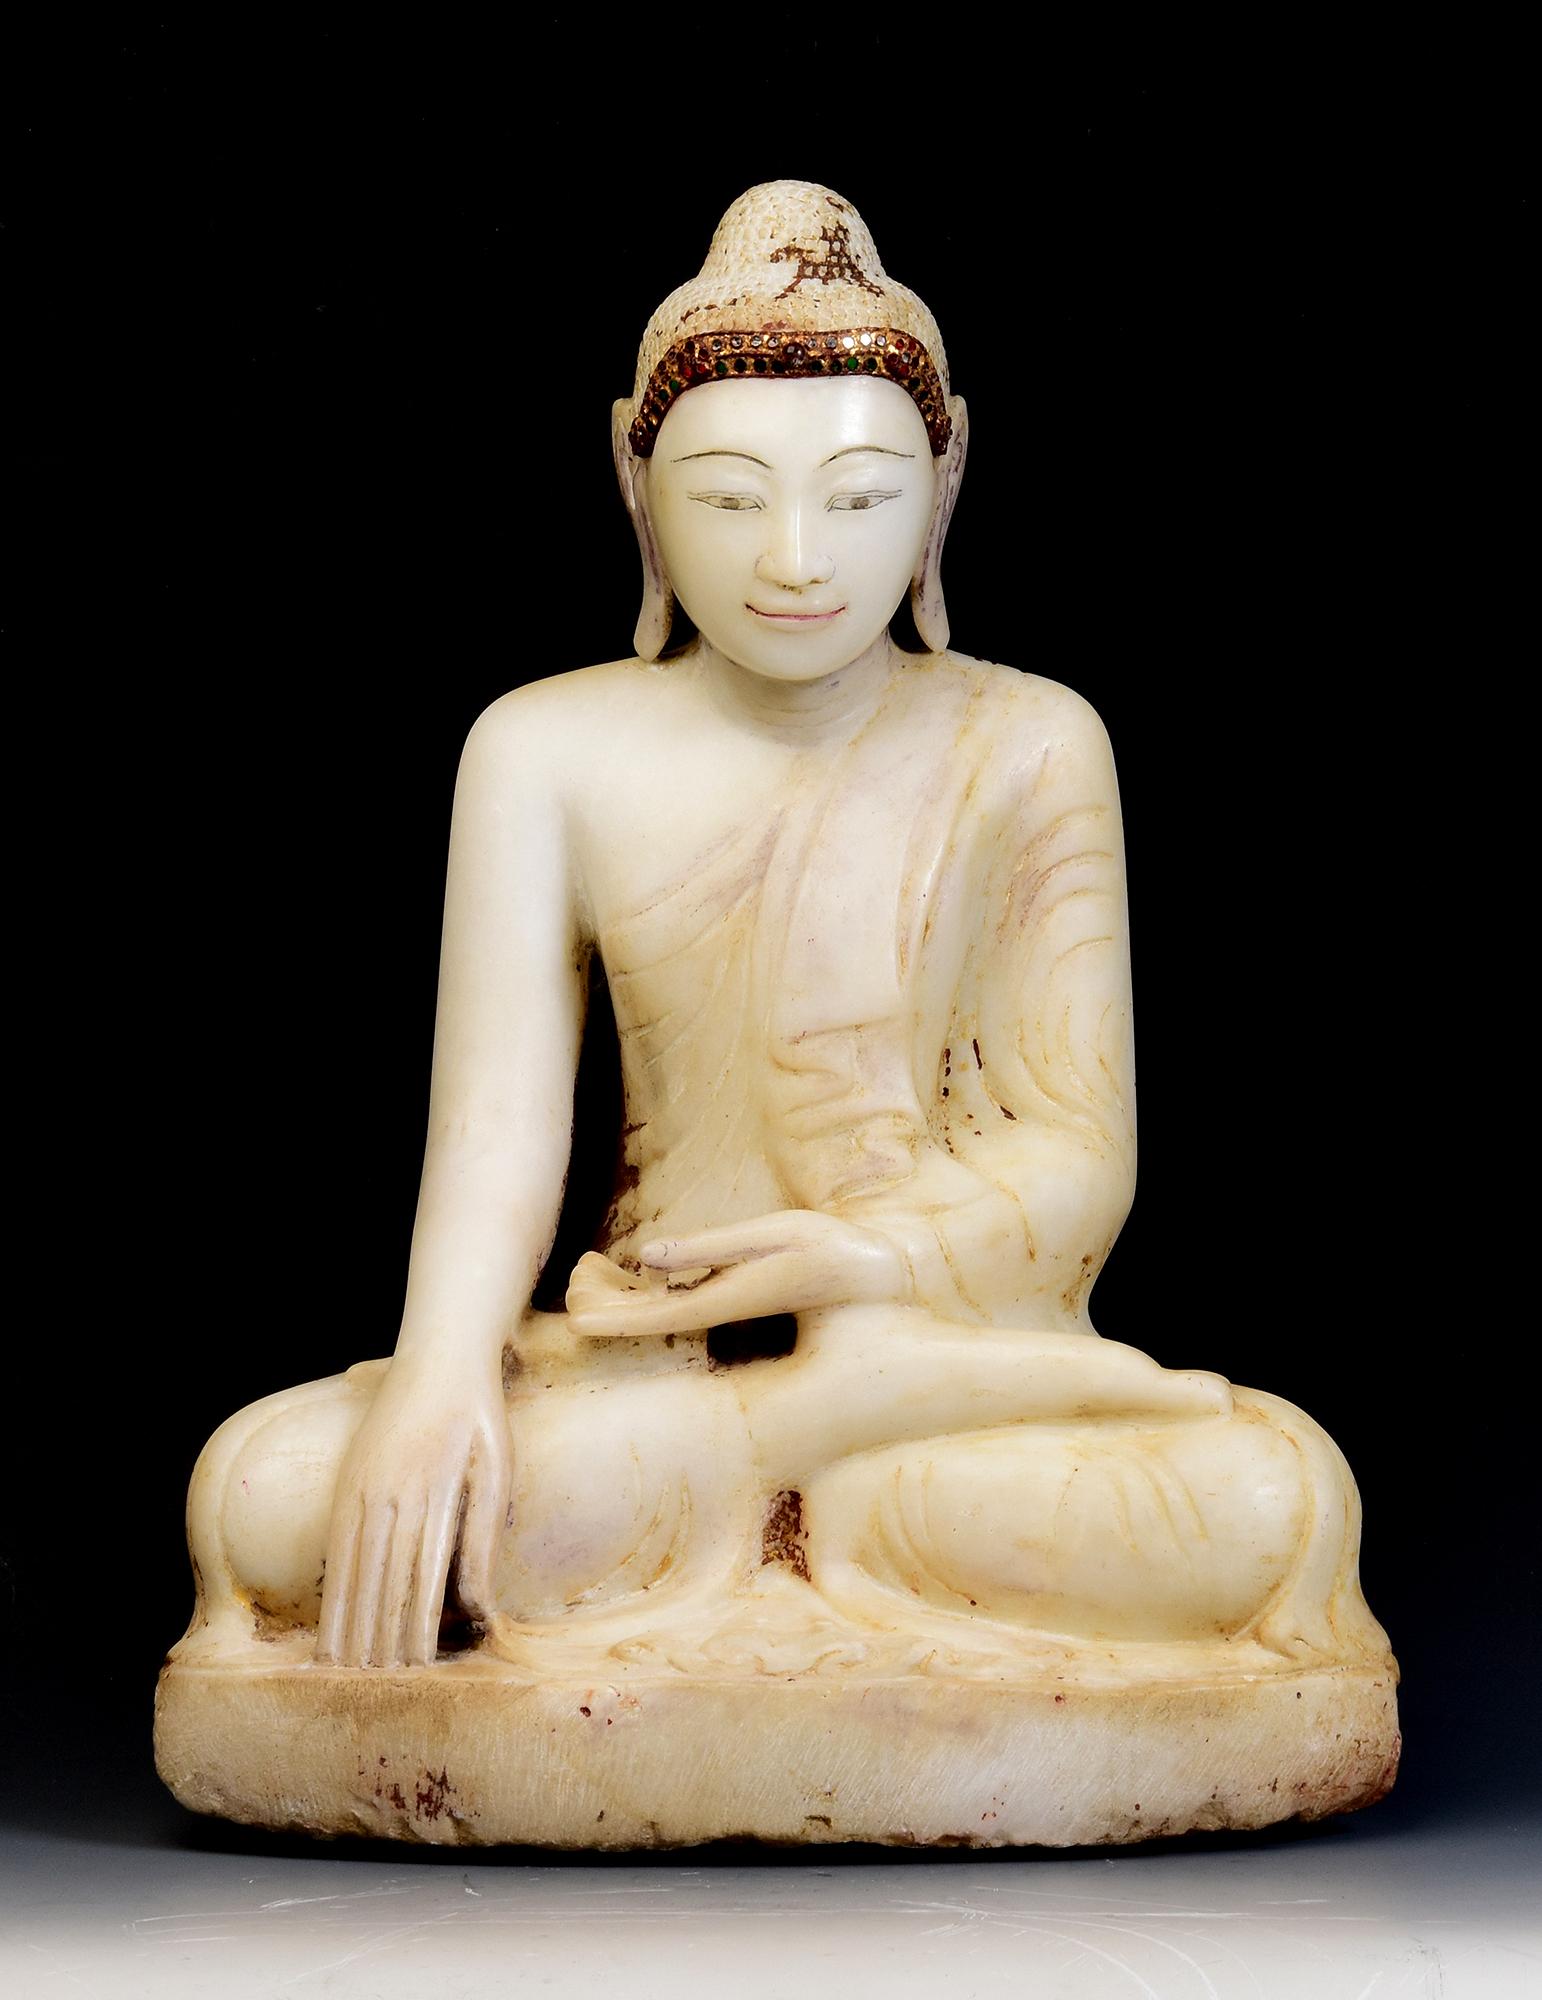 Antique Burmese alabaster Buddha sitting in Mara Vijaya (calling the earth to witness) posture on a base, with inlay of colorful glass pieces on the headband.

Age: Burma, Mandalay Period, 19th Century
Size: Height 49.5 C.M. / Width 37 C.M. / Depth